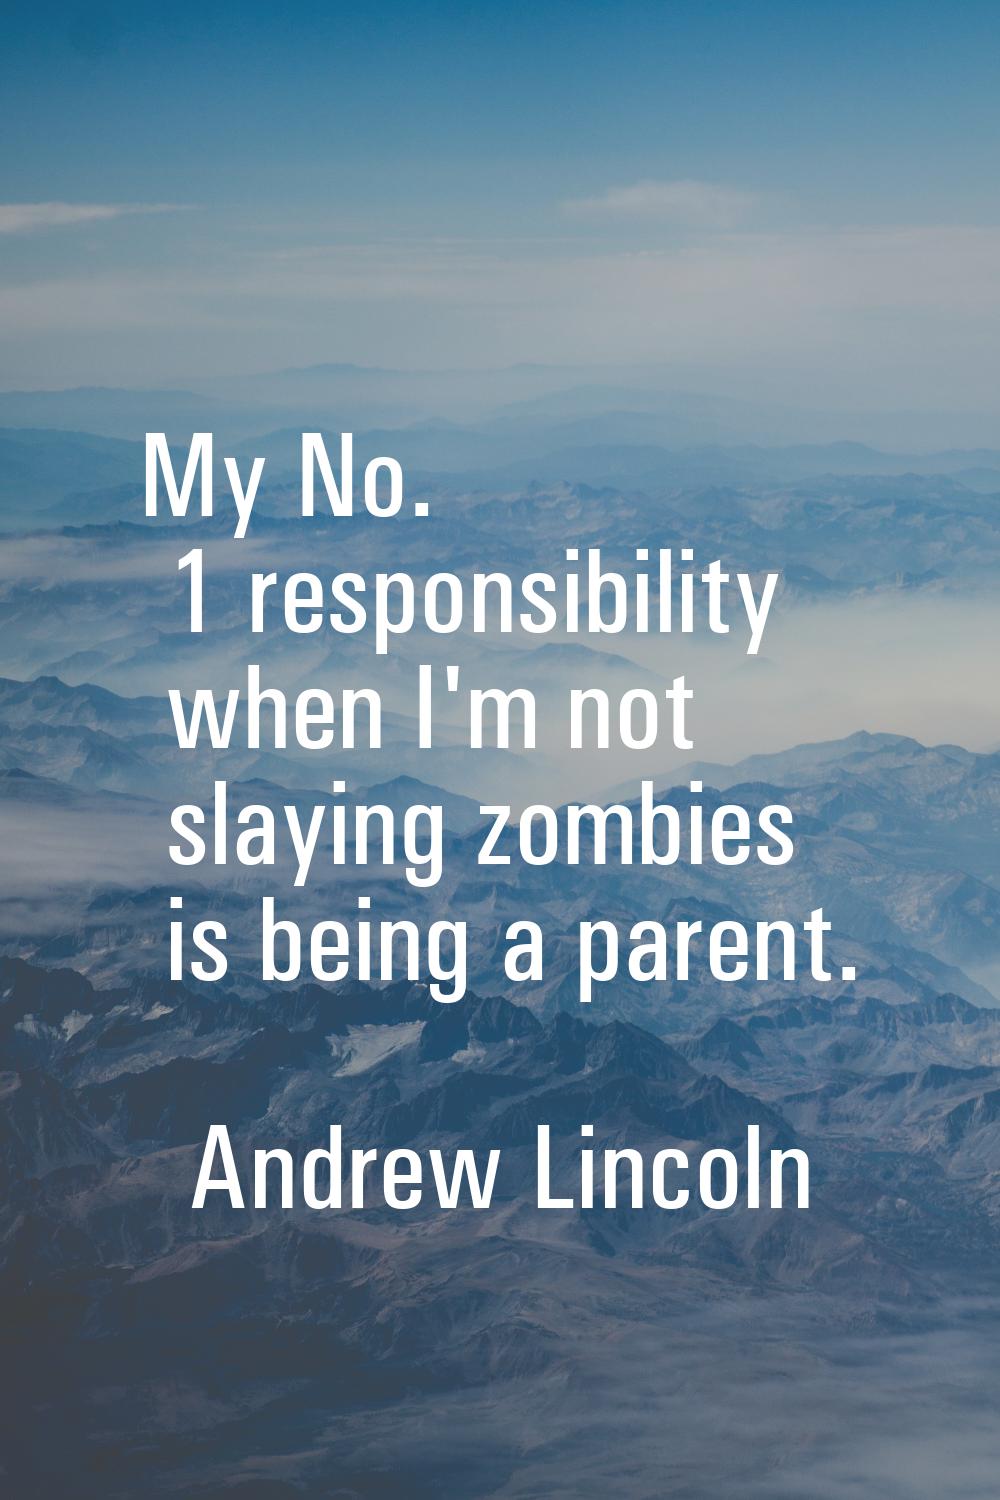 My No. 1 responsibility when I'm not slaying zombies is being a parent.